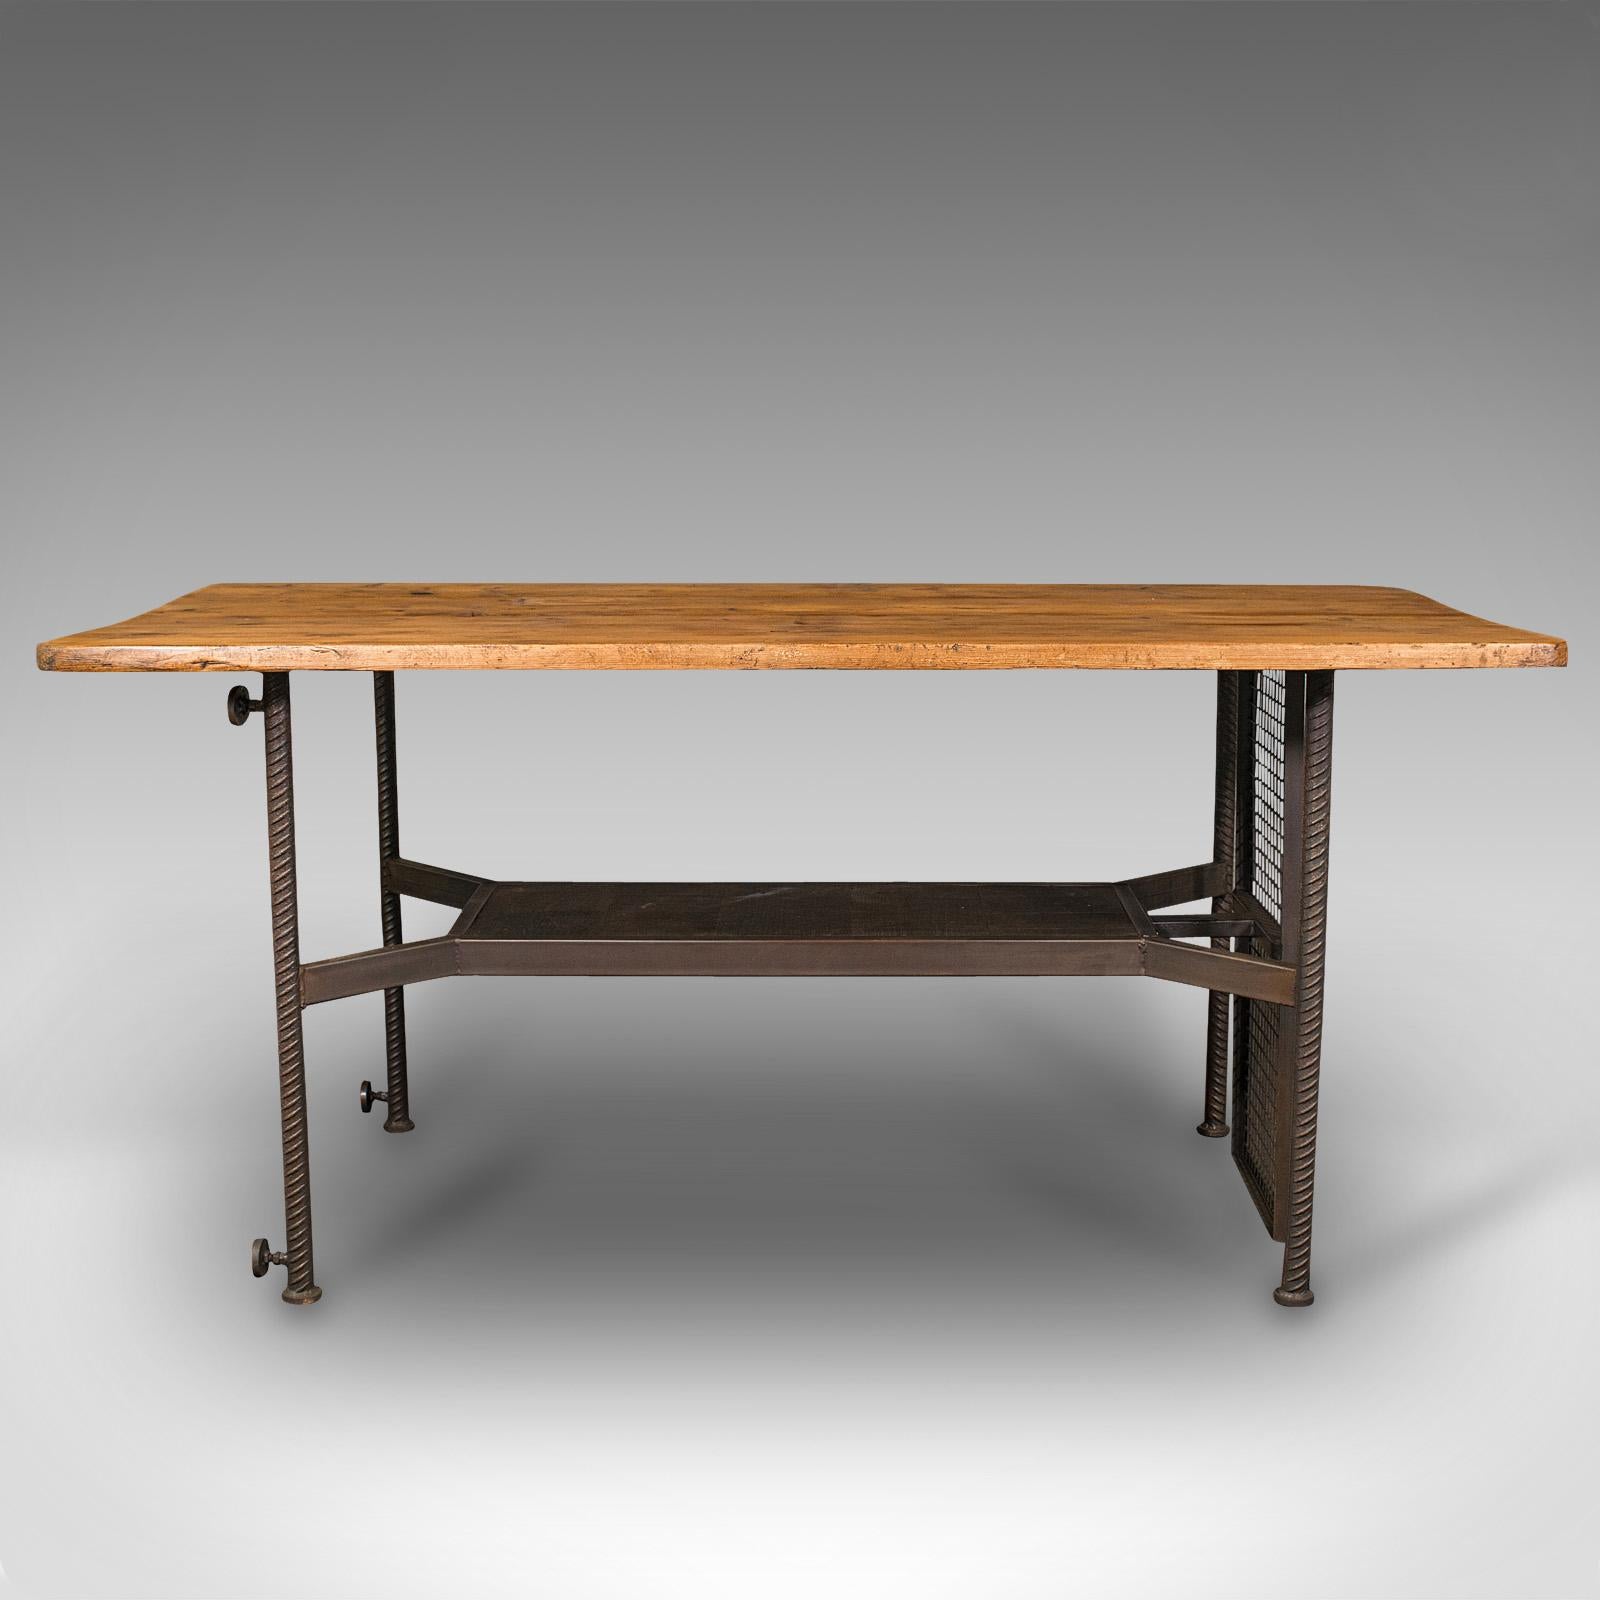 This is a vintage writing desk. An English, steel, oak and Victorian pine shop retail display table, dating to the late 20th century, circa 1990.

Fascinatingly distinctive writing desk or retail shopfitting.
Displays a desirable aged patina